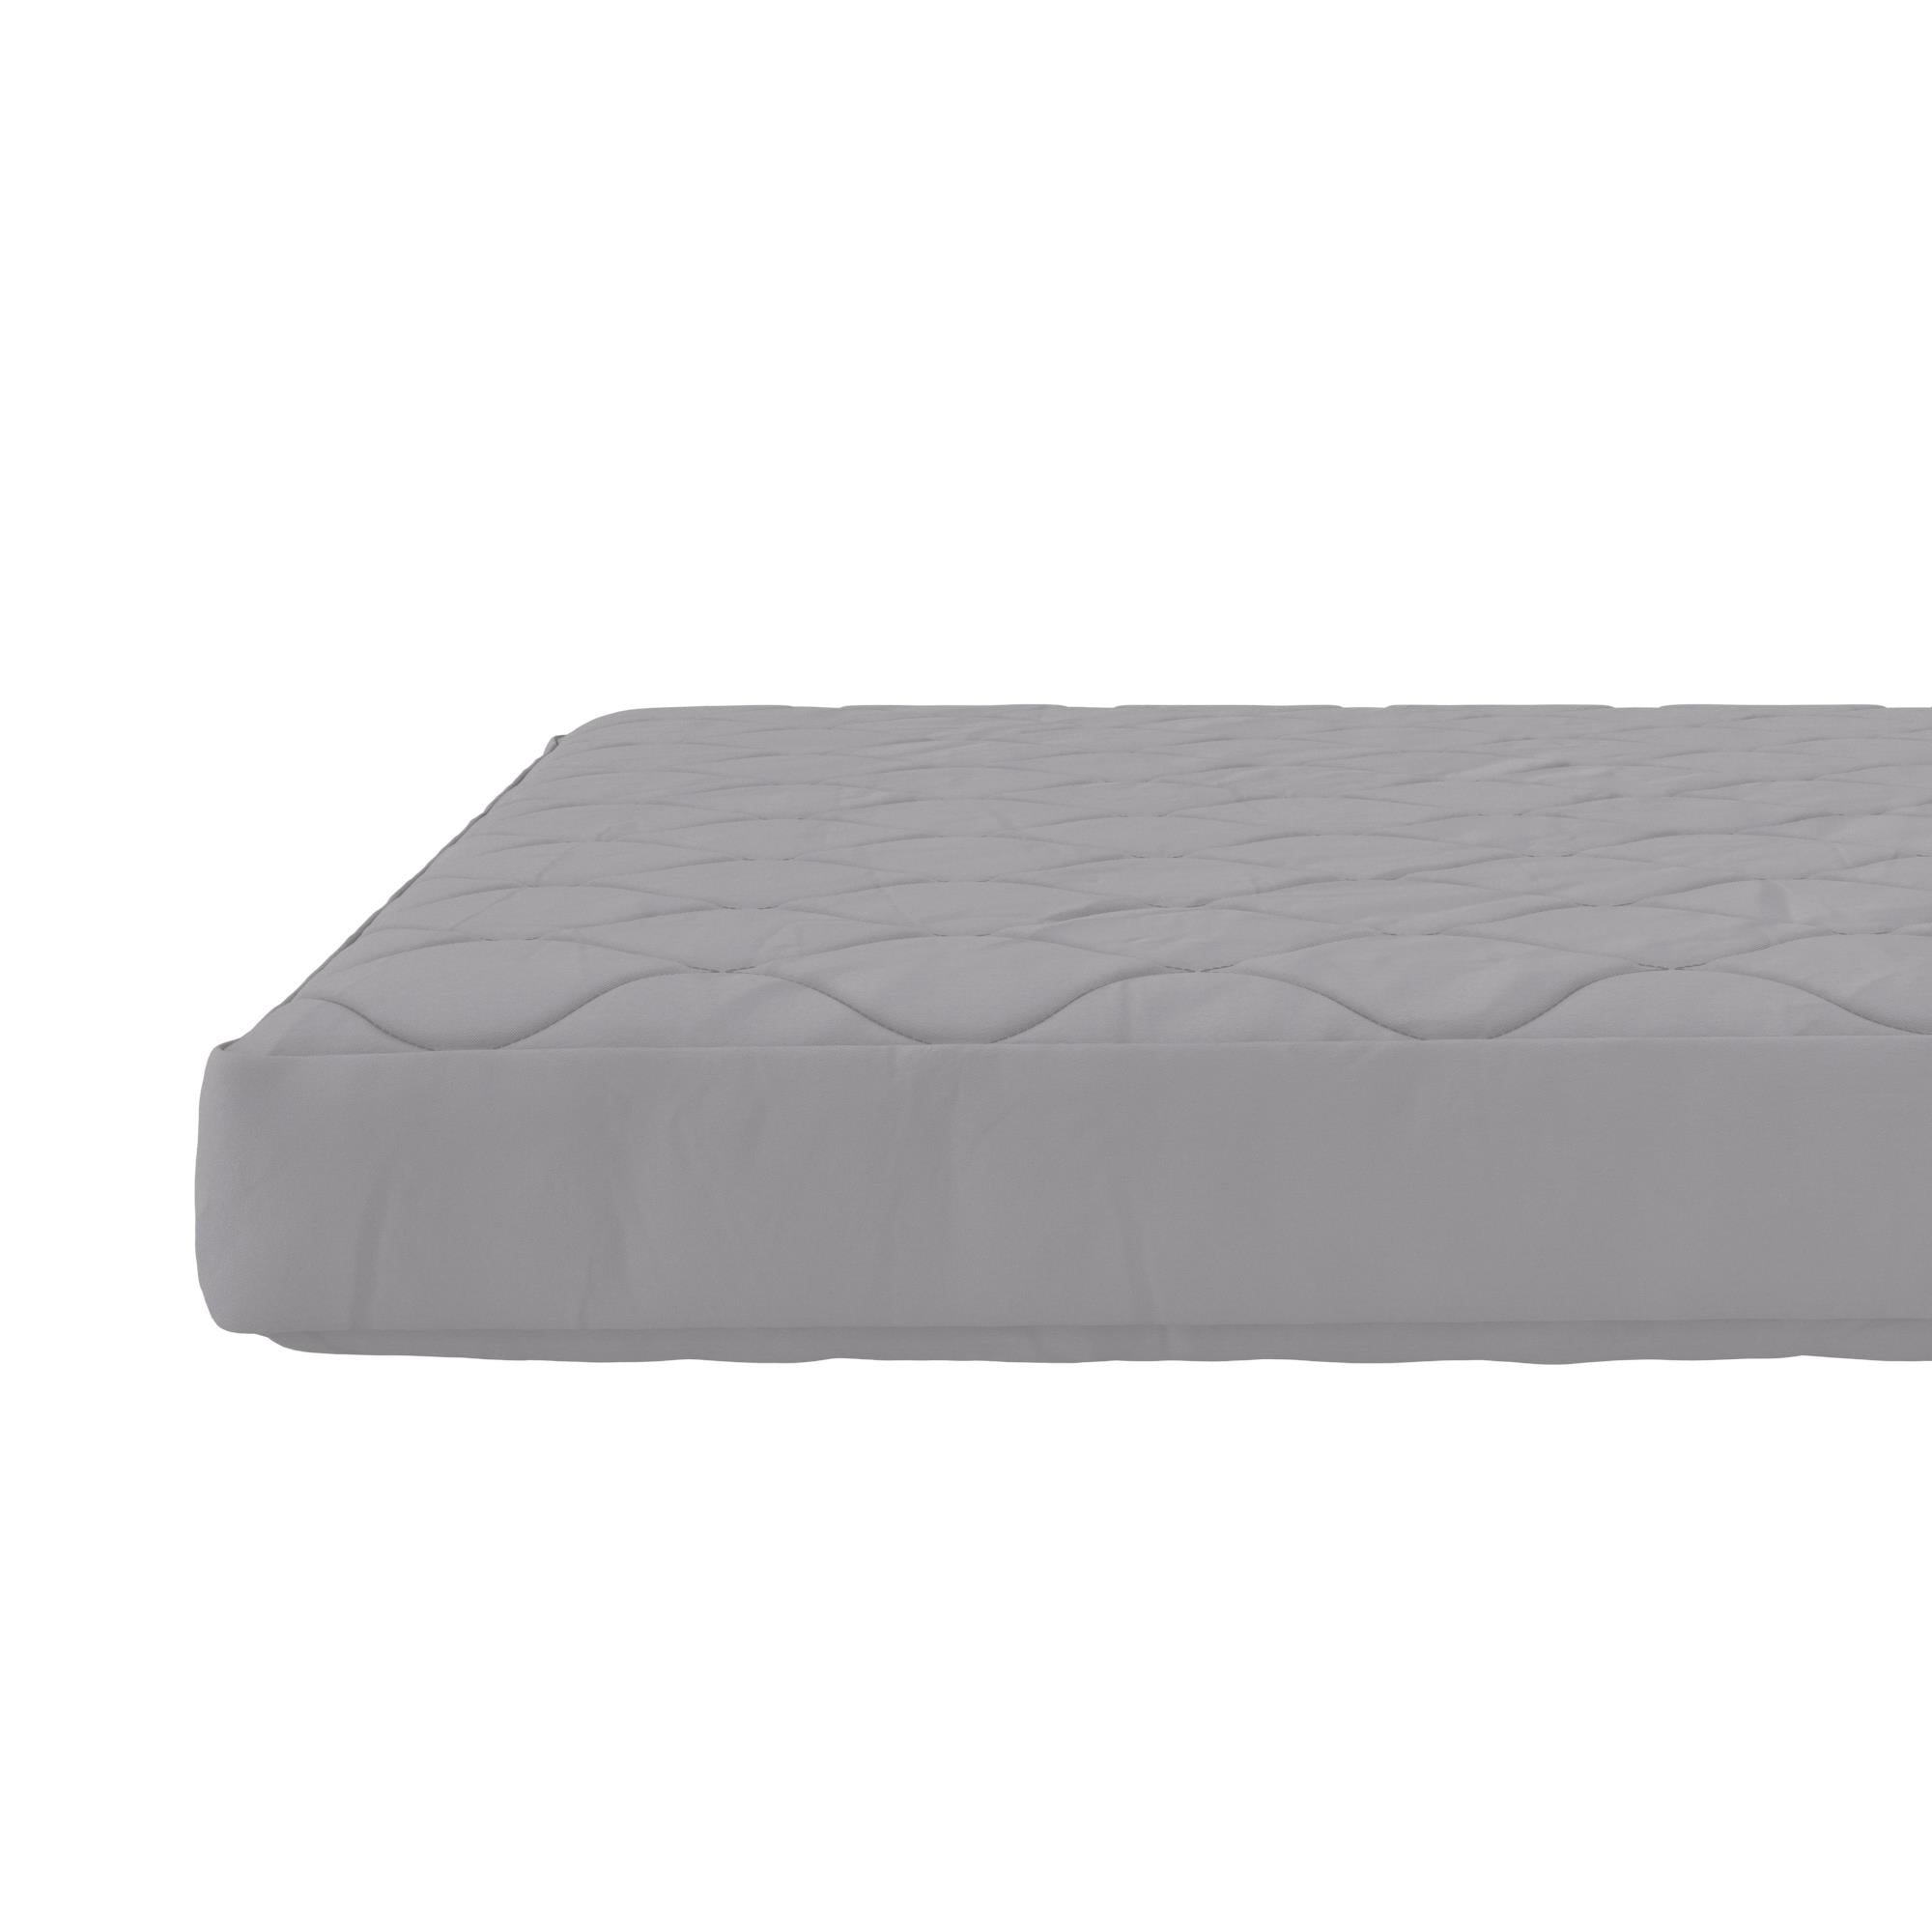 Details about   Memory Foam Mattress Comfort Polyester Quilted Tight Sleep 6 Inch Multiple Size 